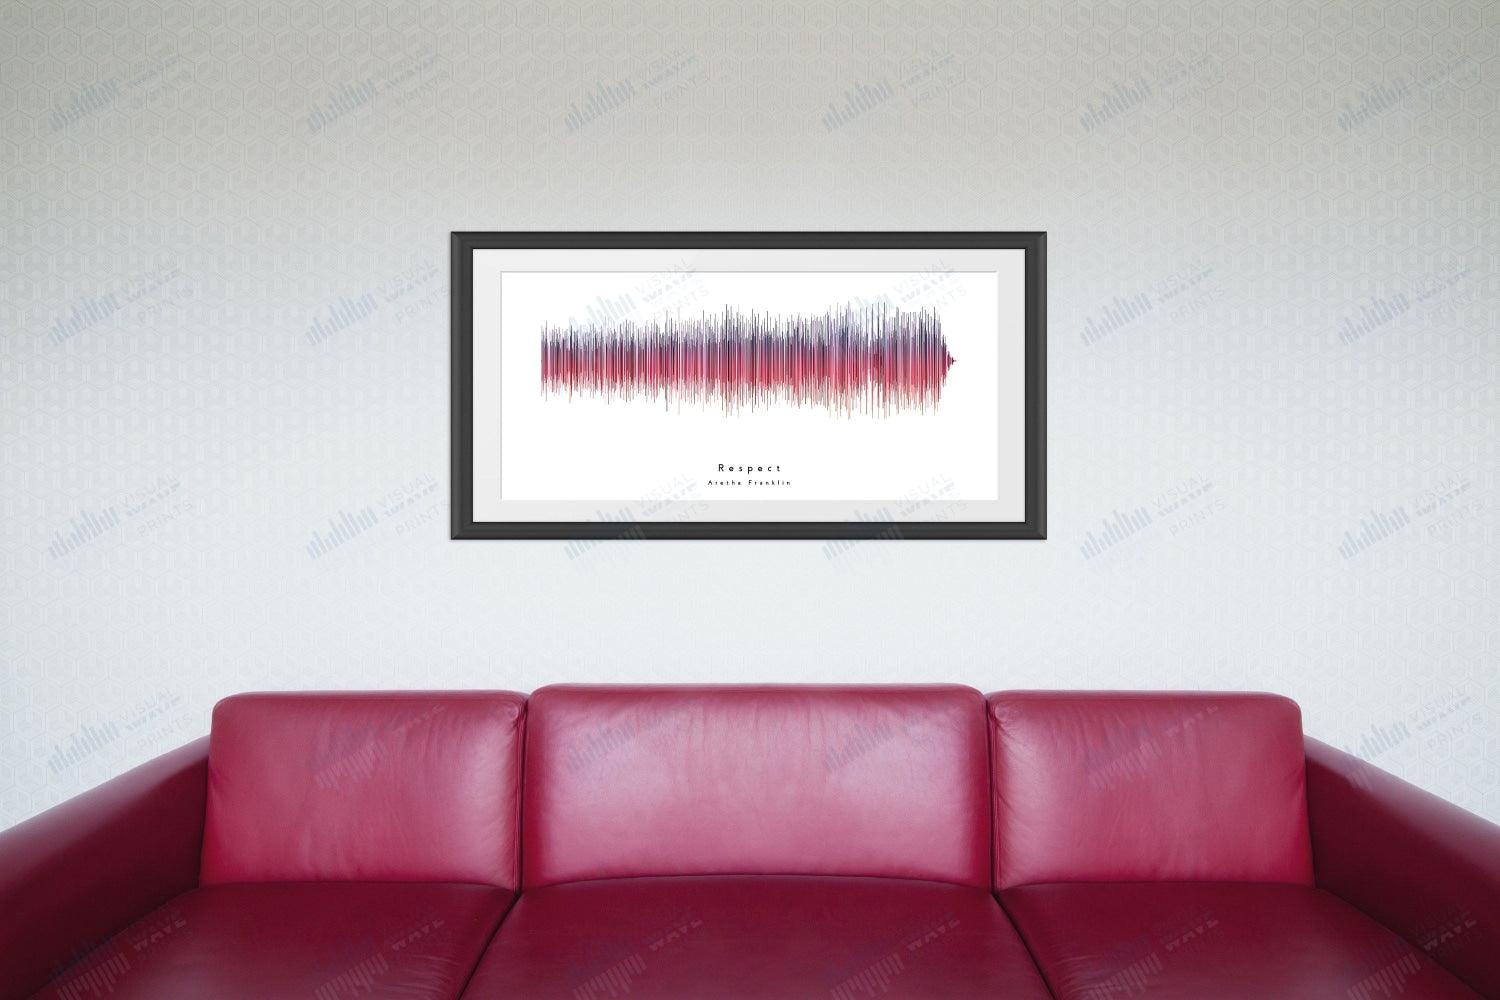 Respect by Aretha Franklin - Visual Wave Prints